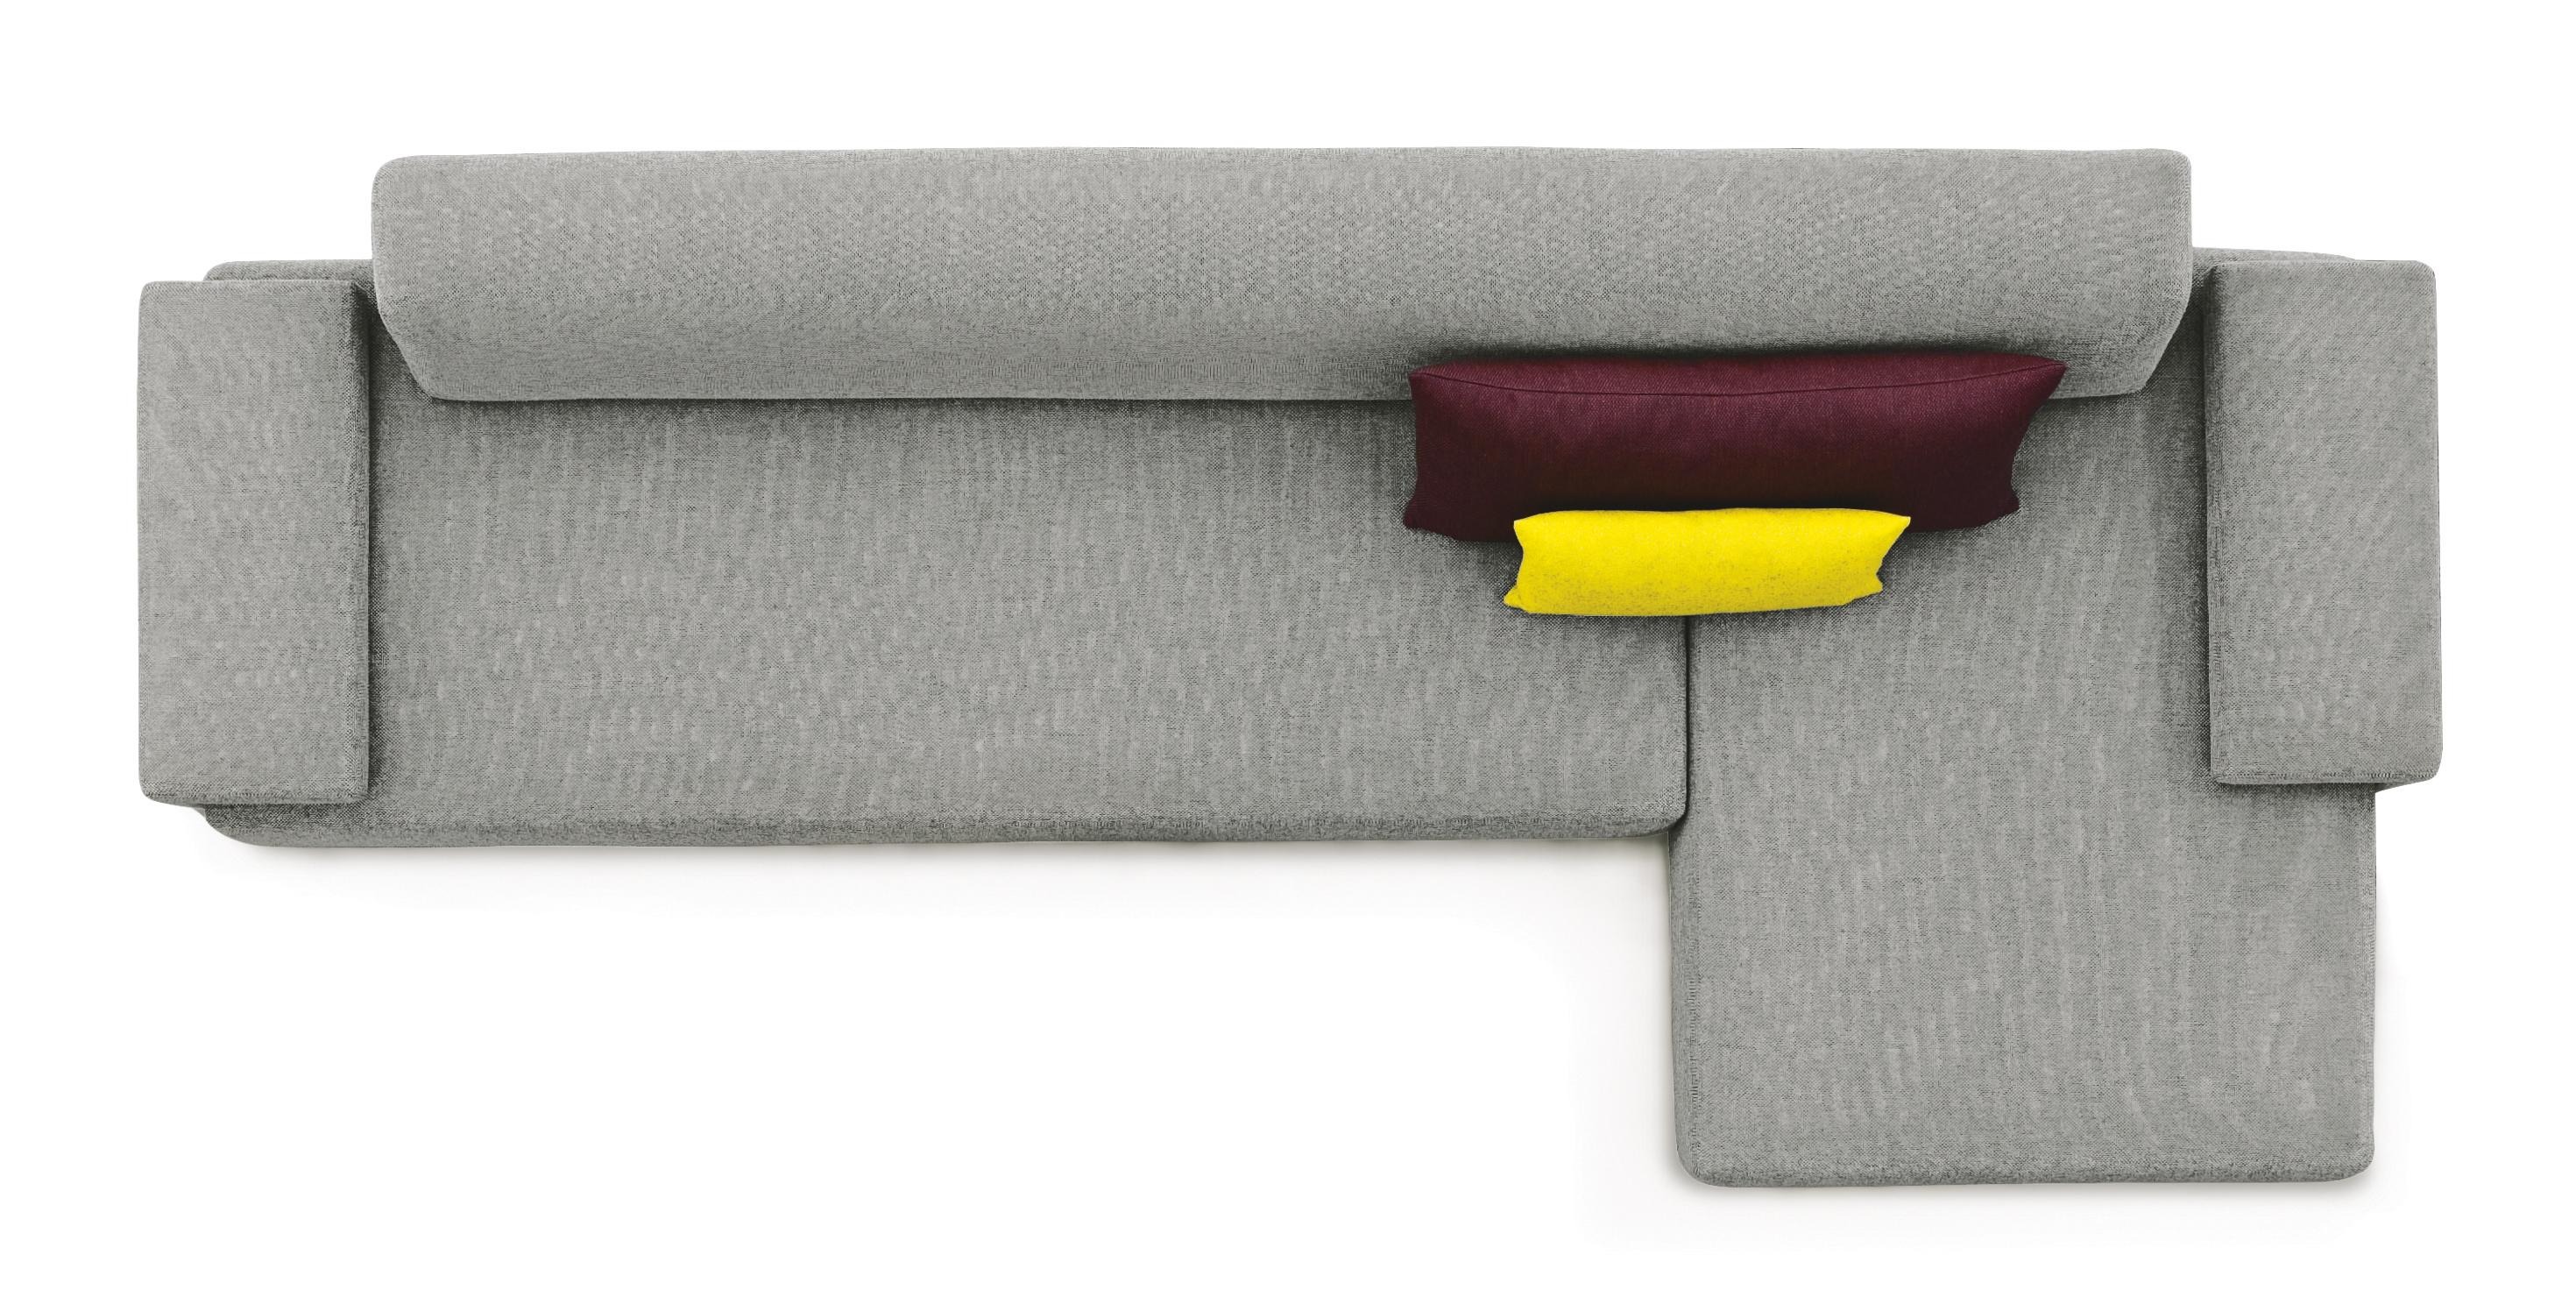 A sofa, a changing landscape made from elemental shapes which dynamically interact with one another. Patricia Urquiola deconstructs the Classic sofa, and re-proposes it through a synthesis of surfaces. Simplicity, definition, dynamism and